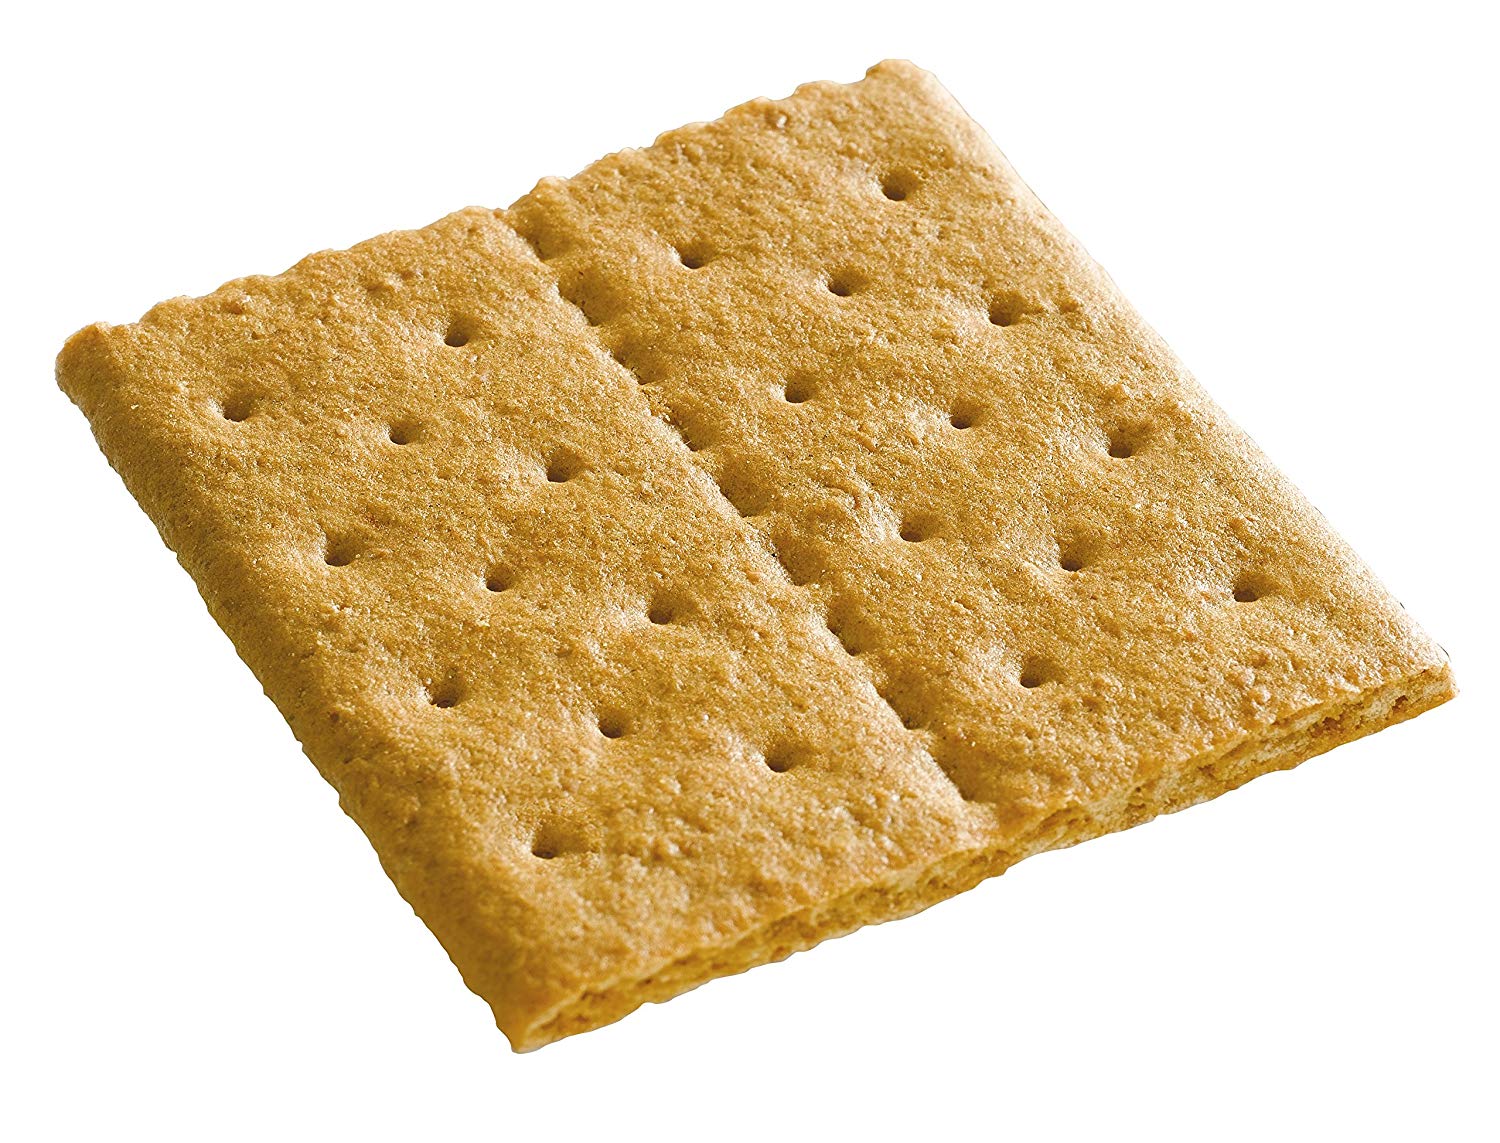 How big is a graham cracker in inches